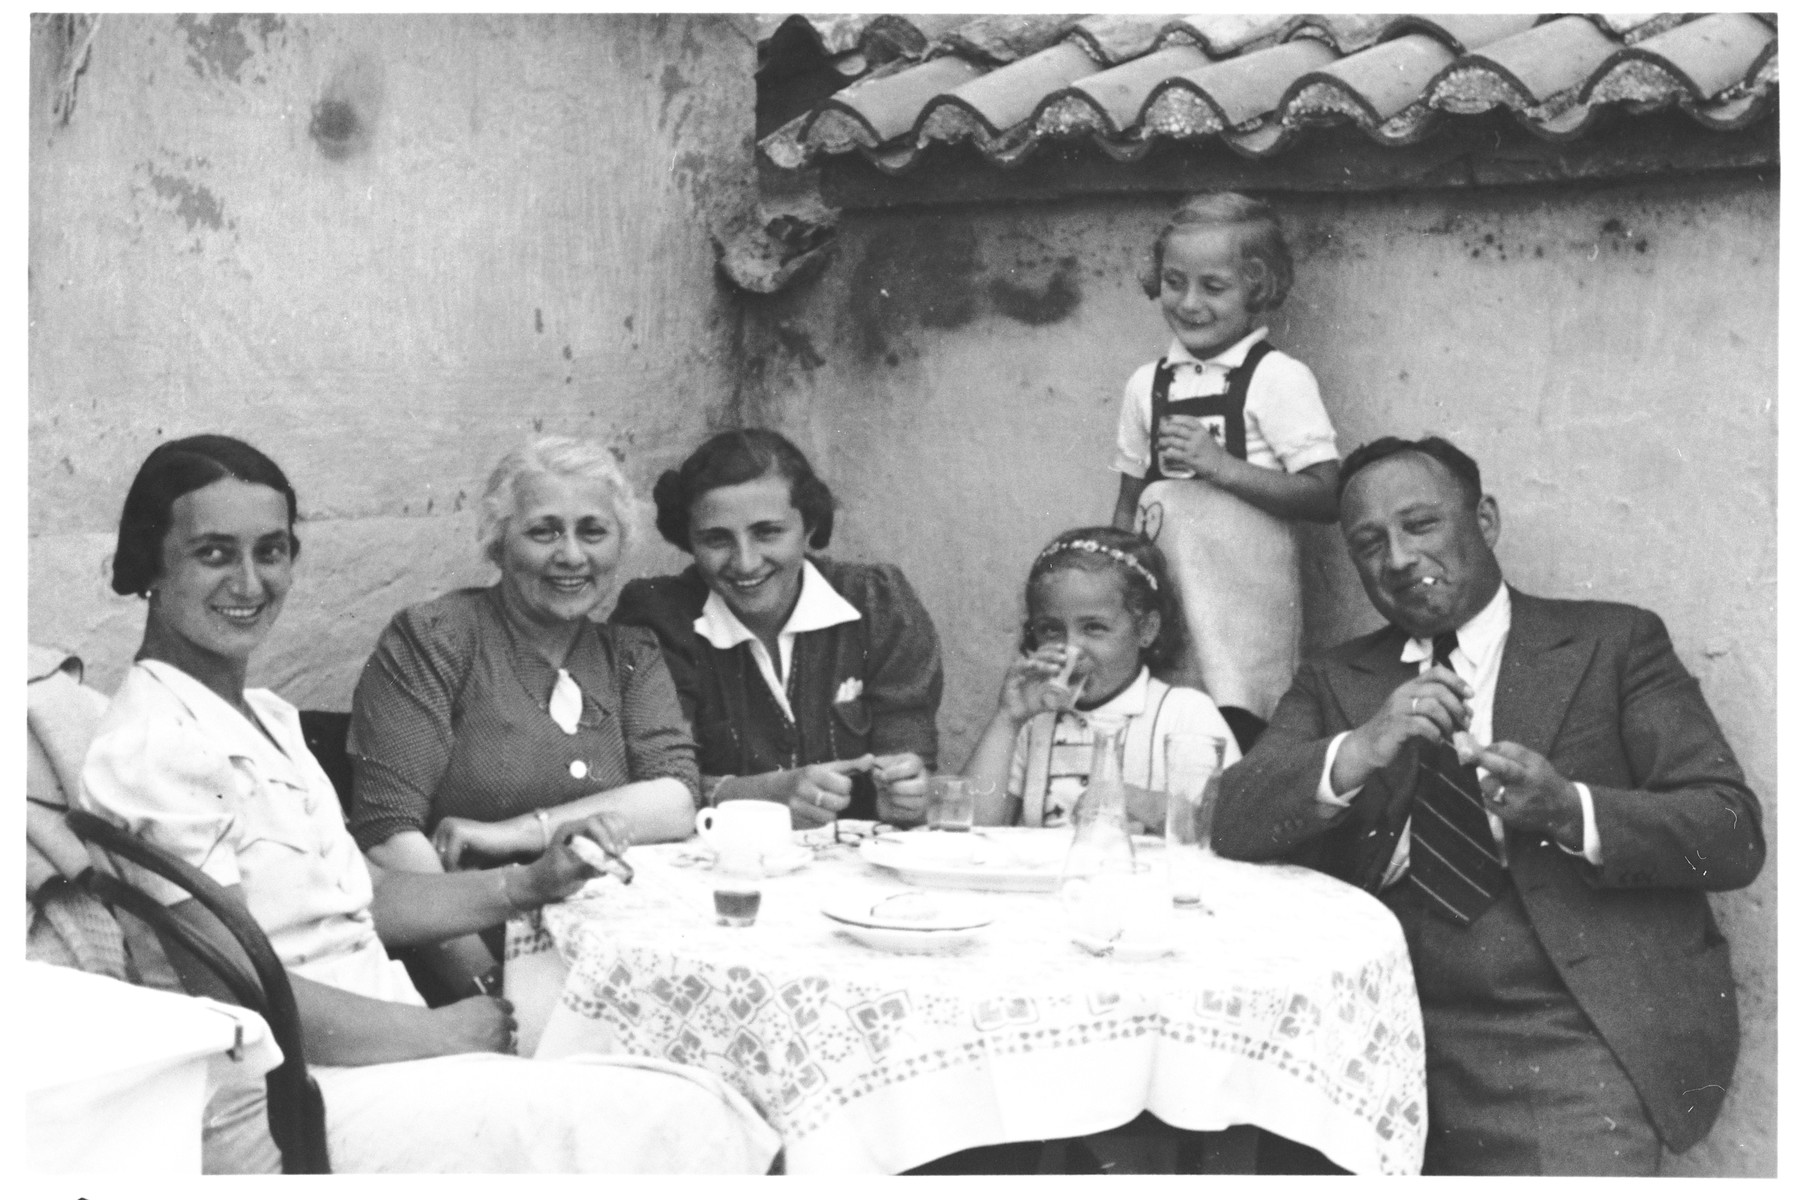 Members of the Spitzer family sit outside around a table.